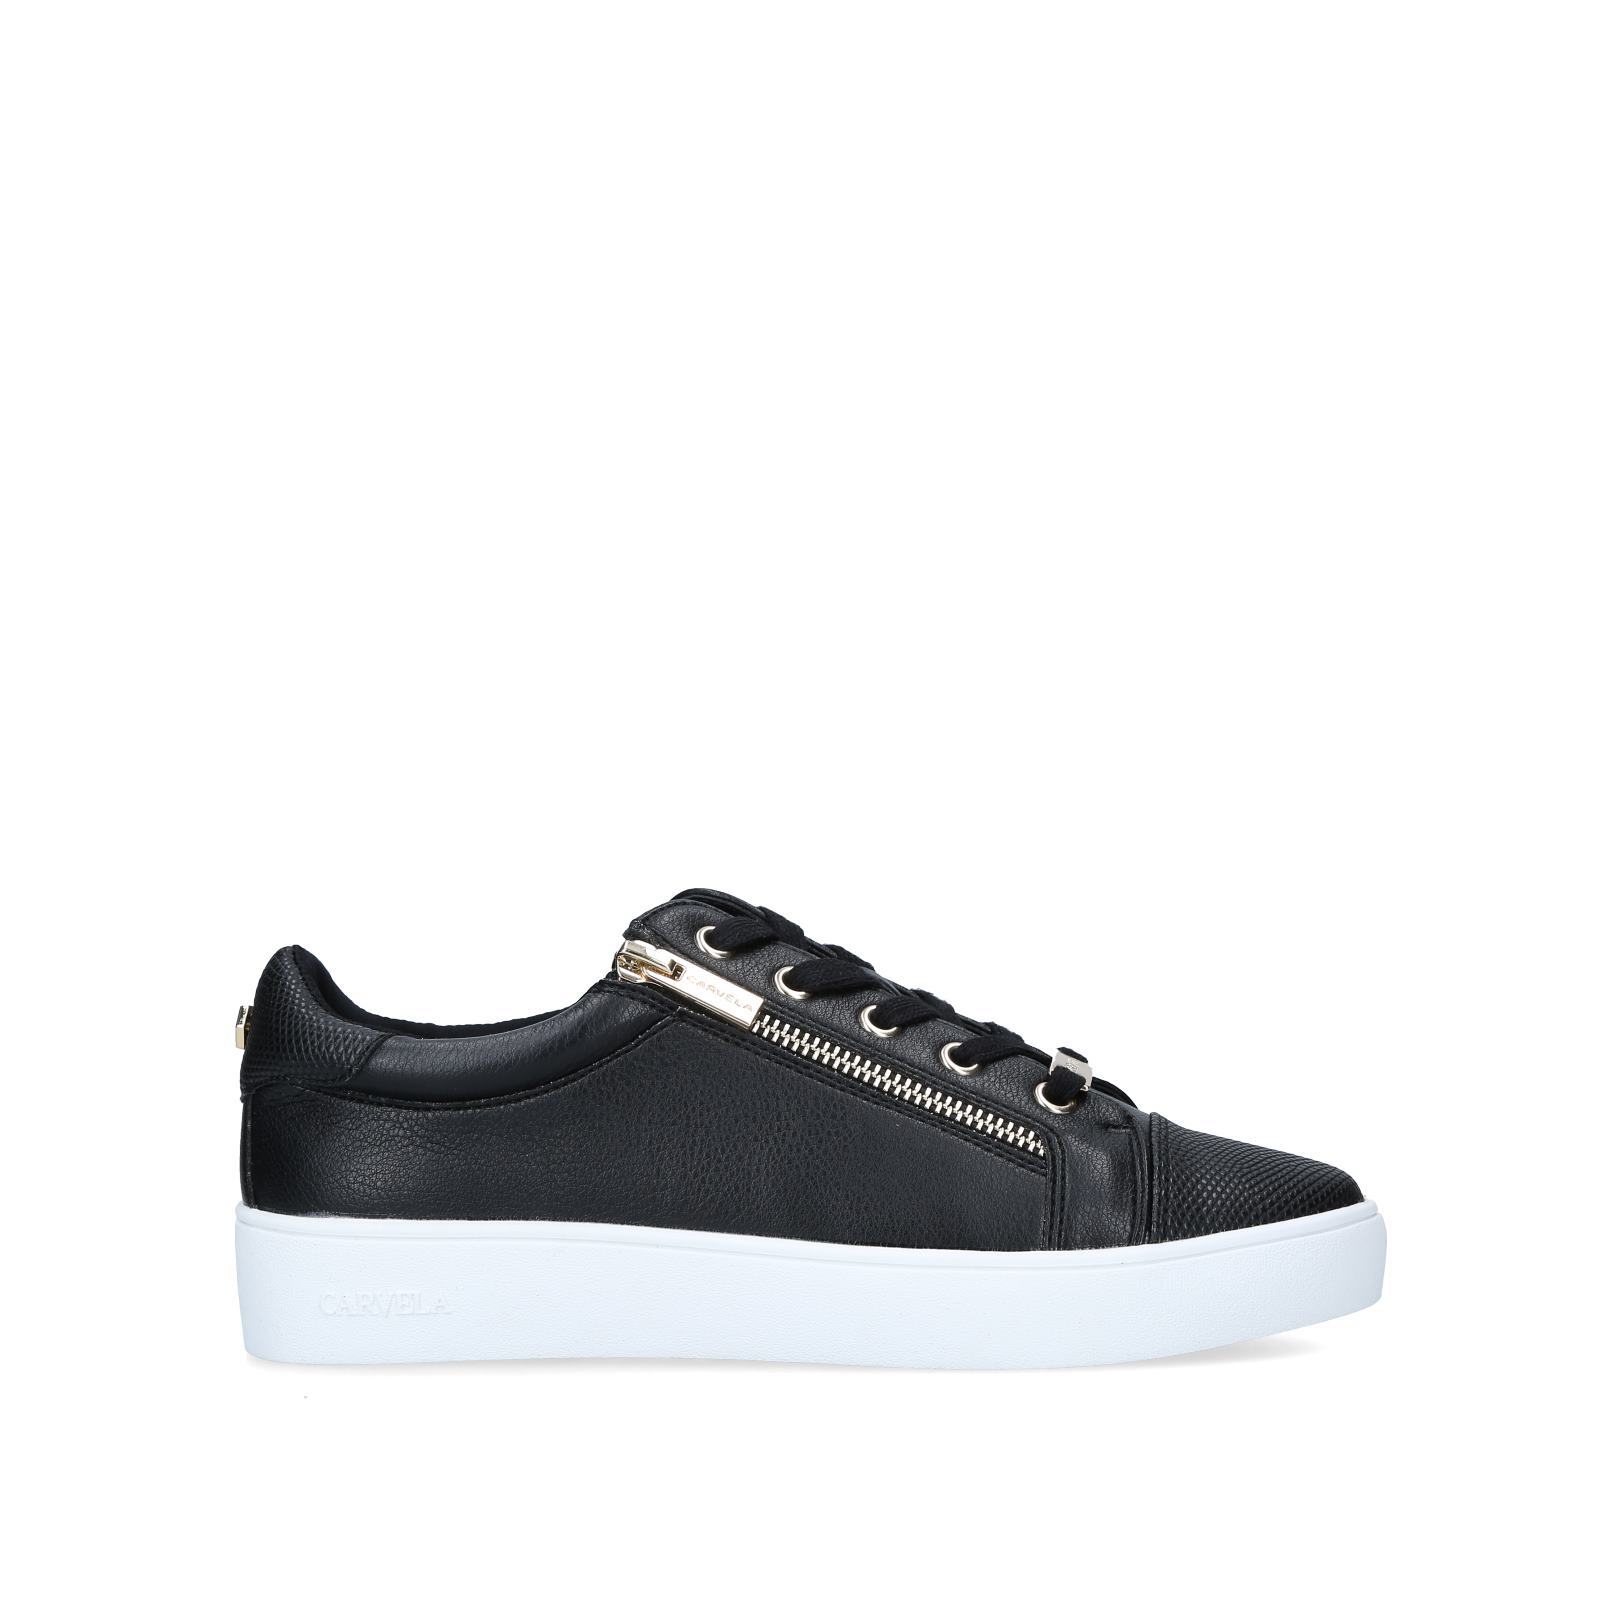 JAGGED Black Lace Up Sneakers by CARVELA